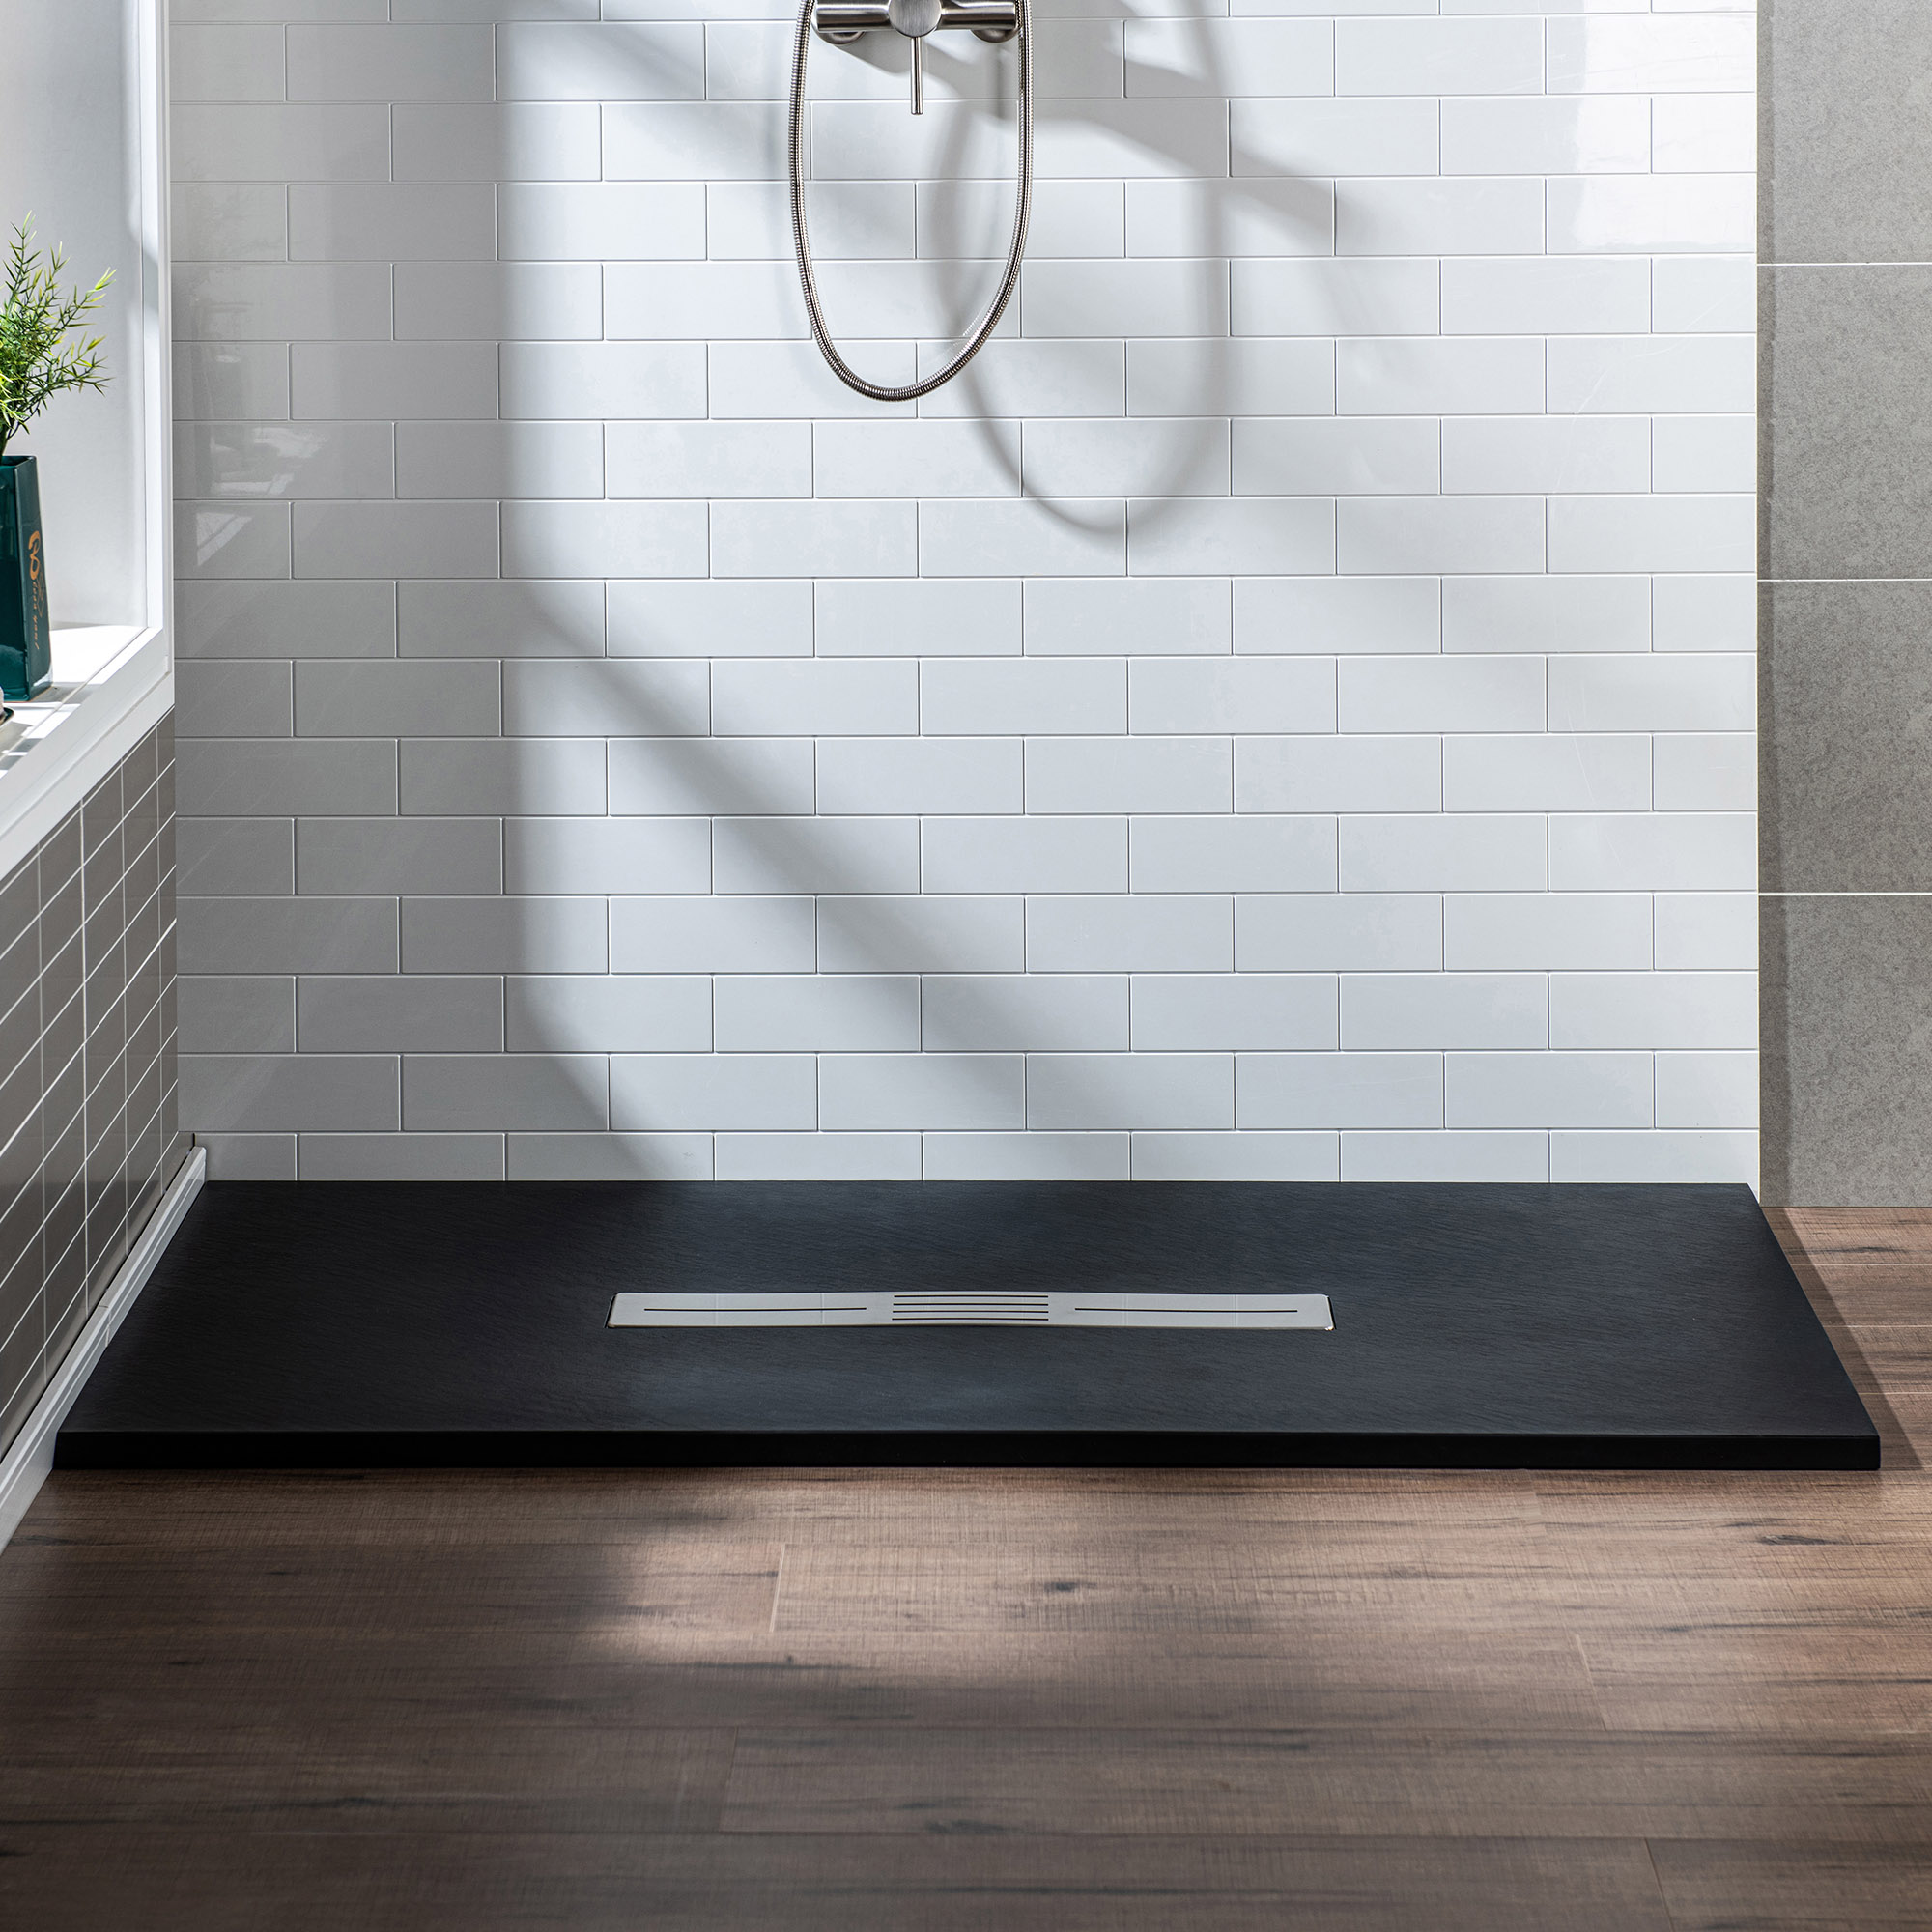  WOODBRIDGE 60-in L x 32-in W Zero Threshold End Drain Shower Base with Center Drain Placement, Matching Decorative Drain Plate and Tile Flange, Wheel Chair Access, Low Profile, Black_12511